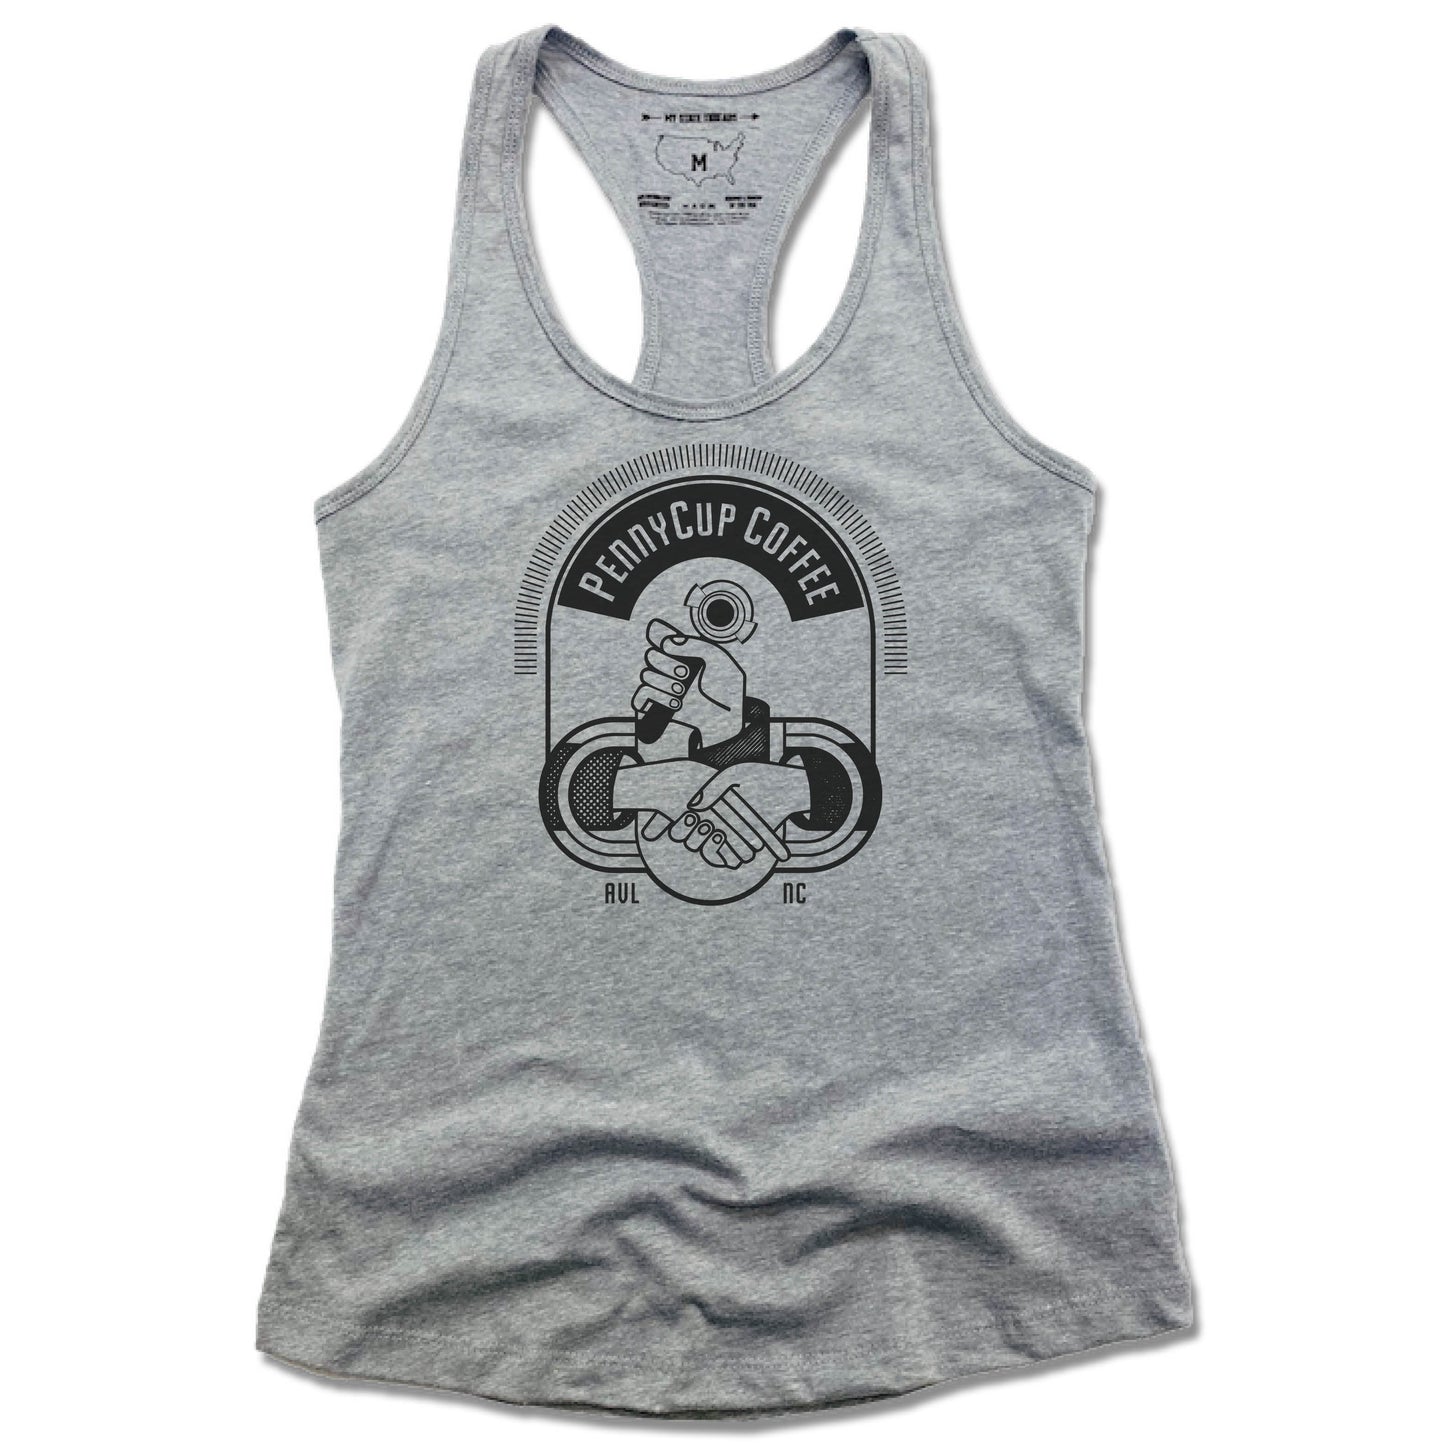 PENNYCUP COFFEE CO | LADIES GRAY TANK | LOGO